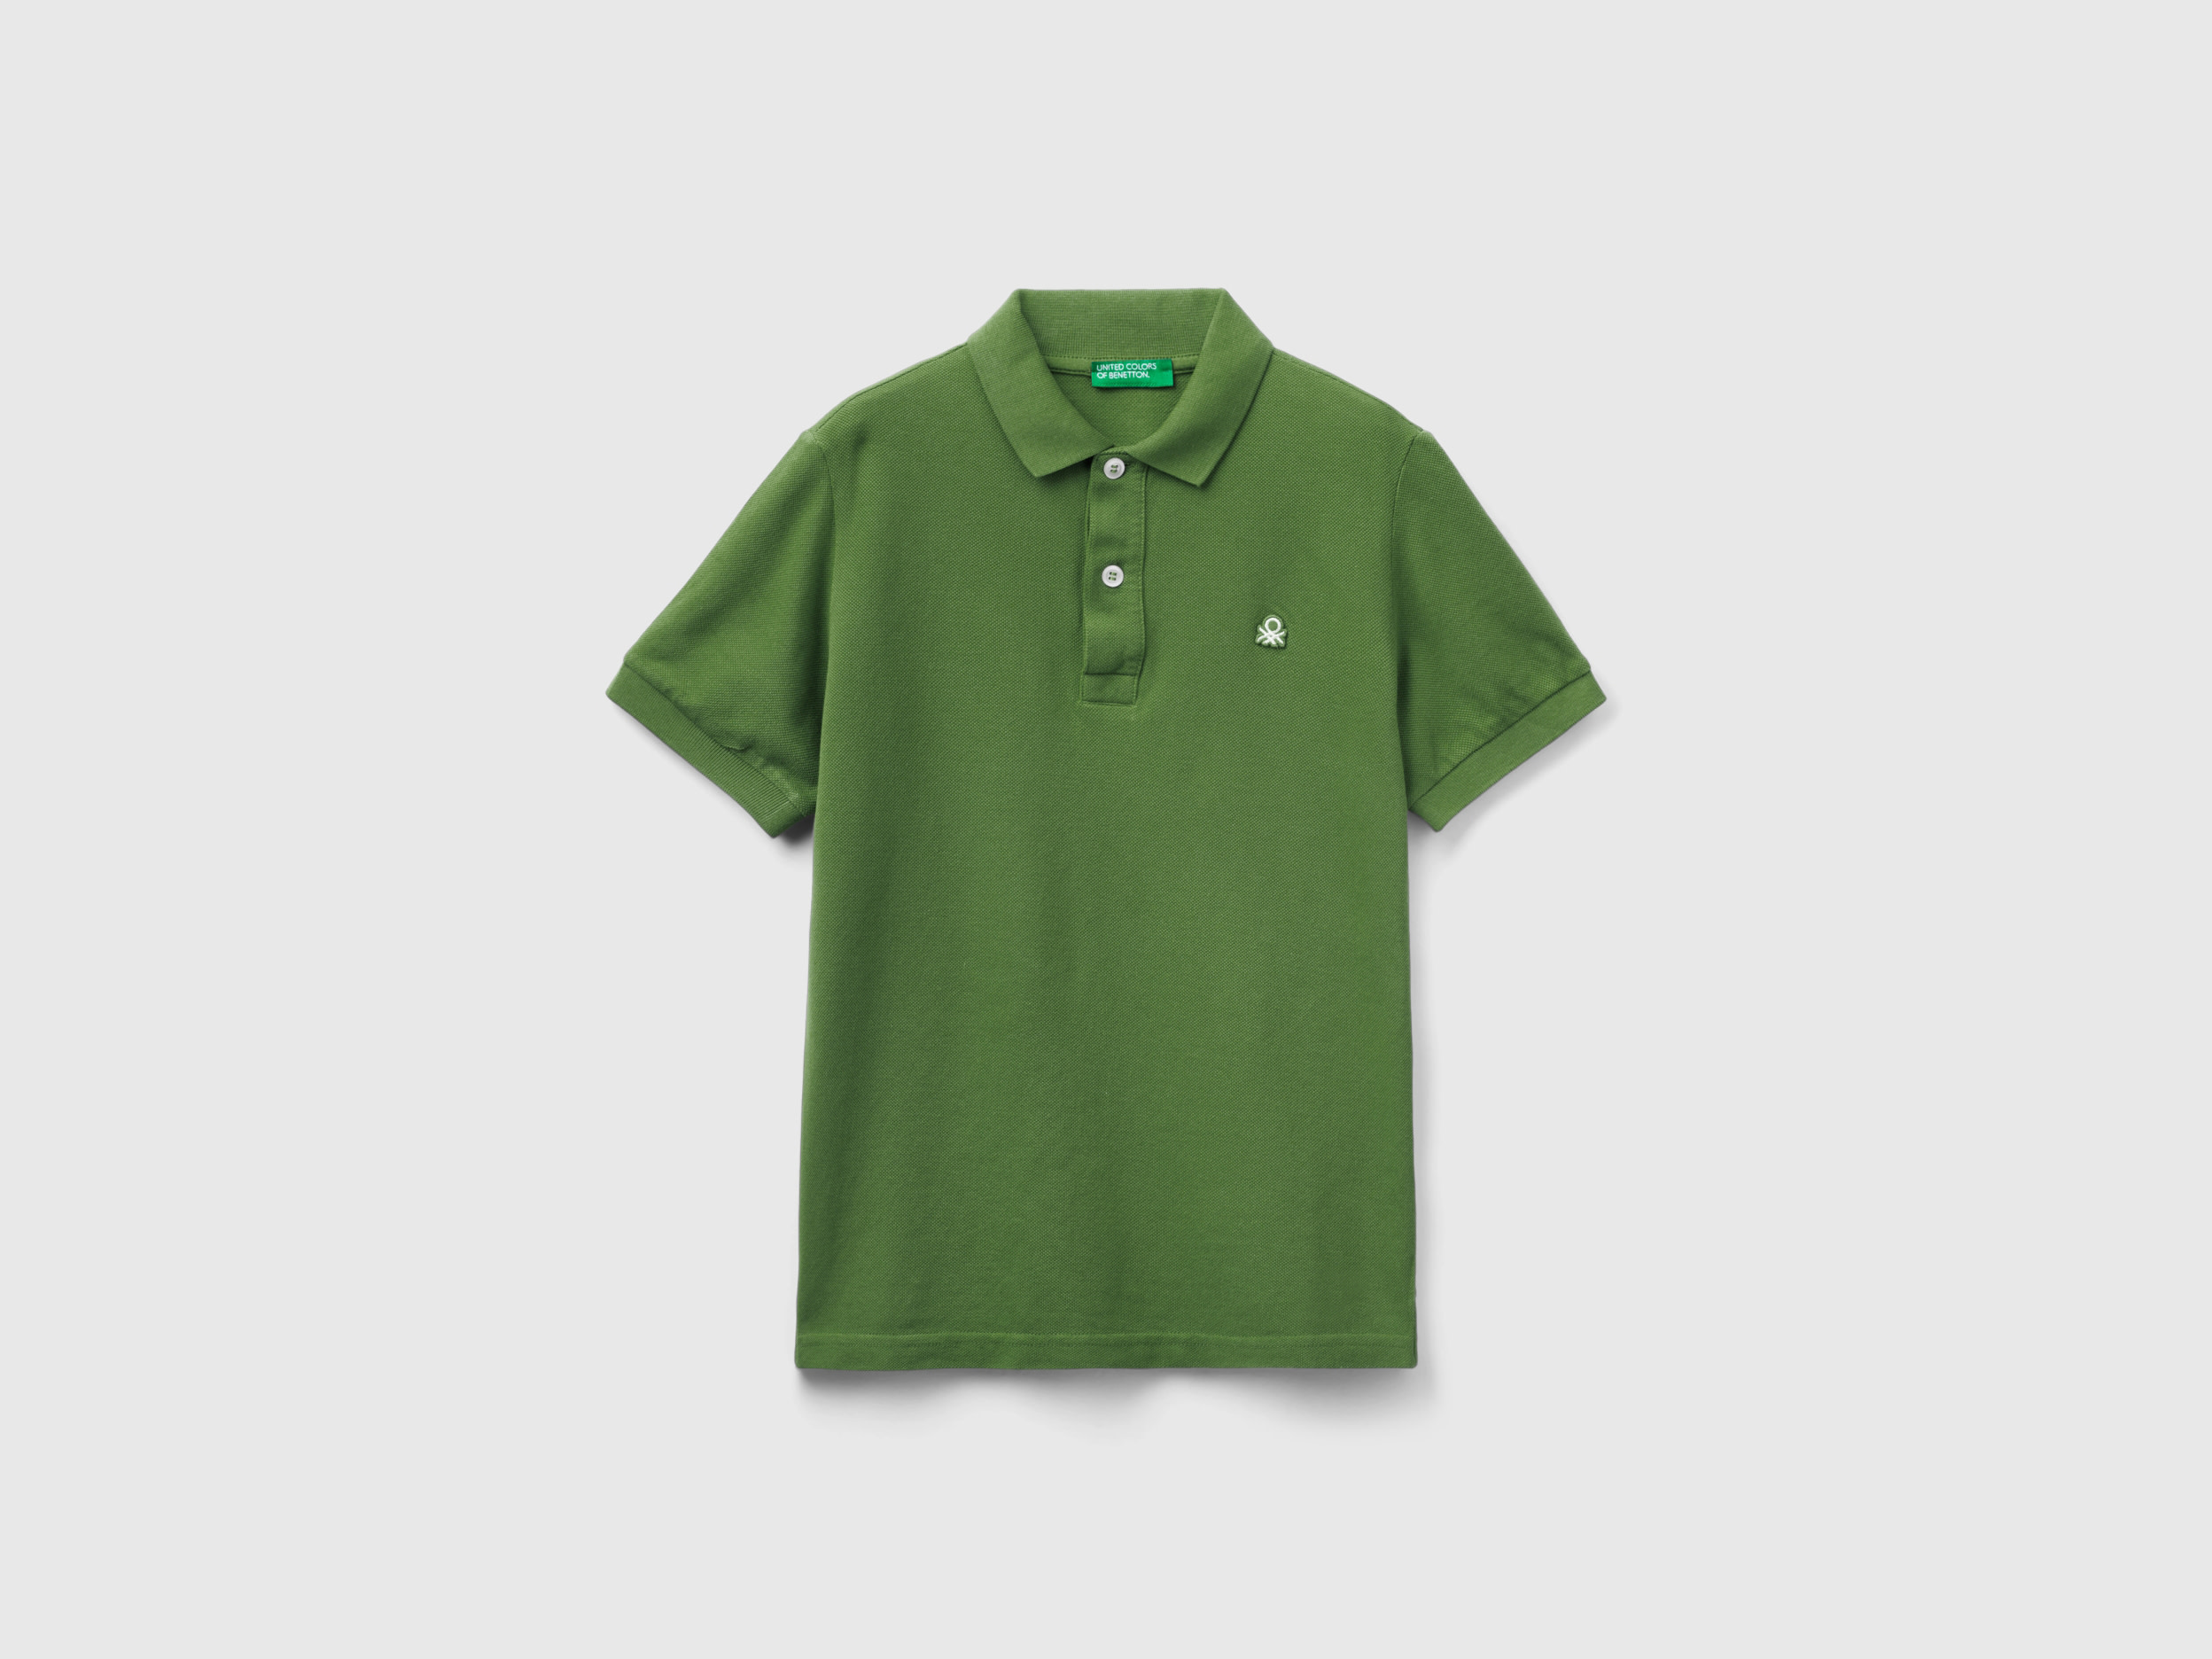 Image of Benetton, Slim Fit Polo In 100% Organic Cotton, size S, Green, Kids